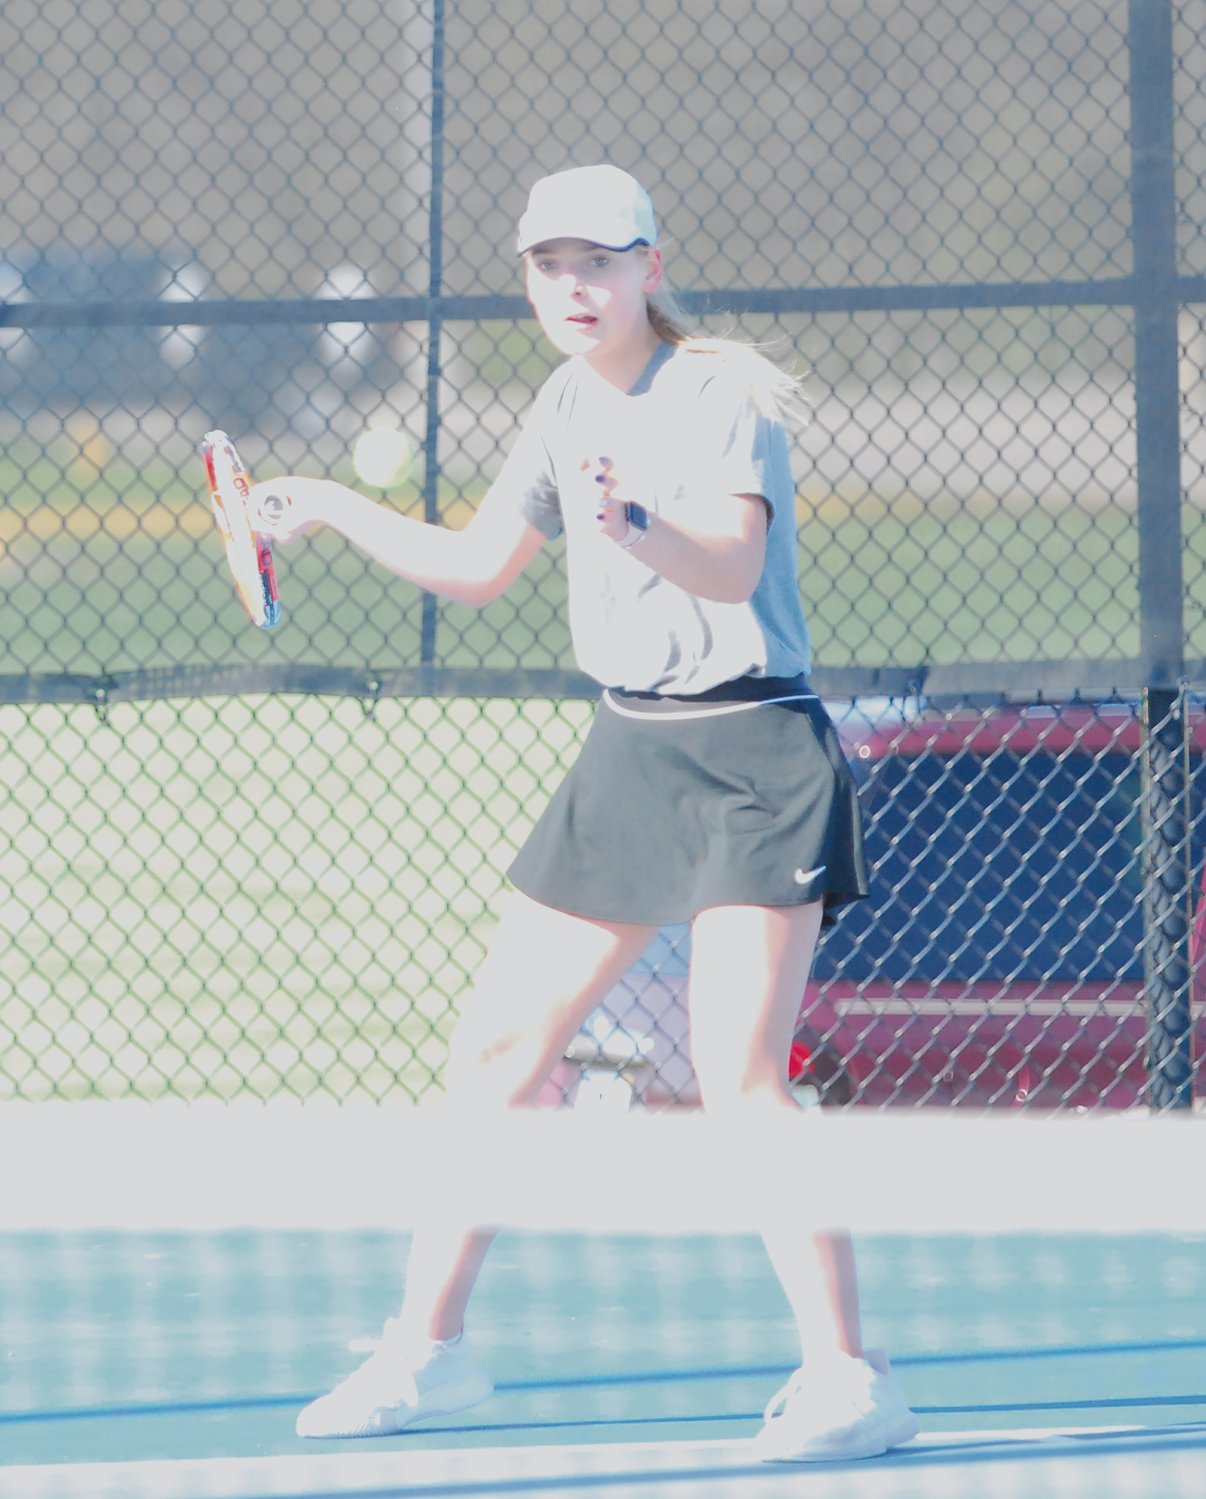 Crawfordsville senior Lauren Hale sealed the win for the Athenians over Southmont with a win at No. 1 singles.